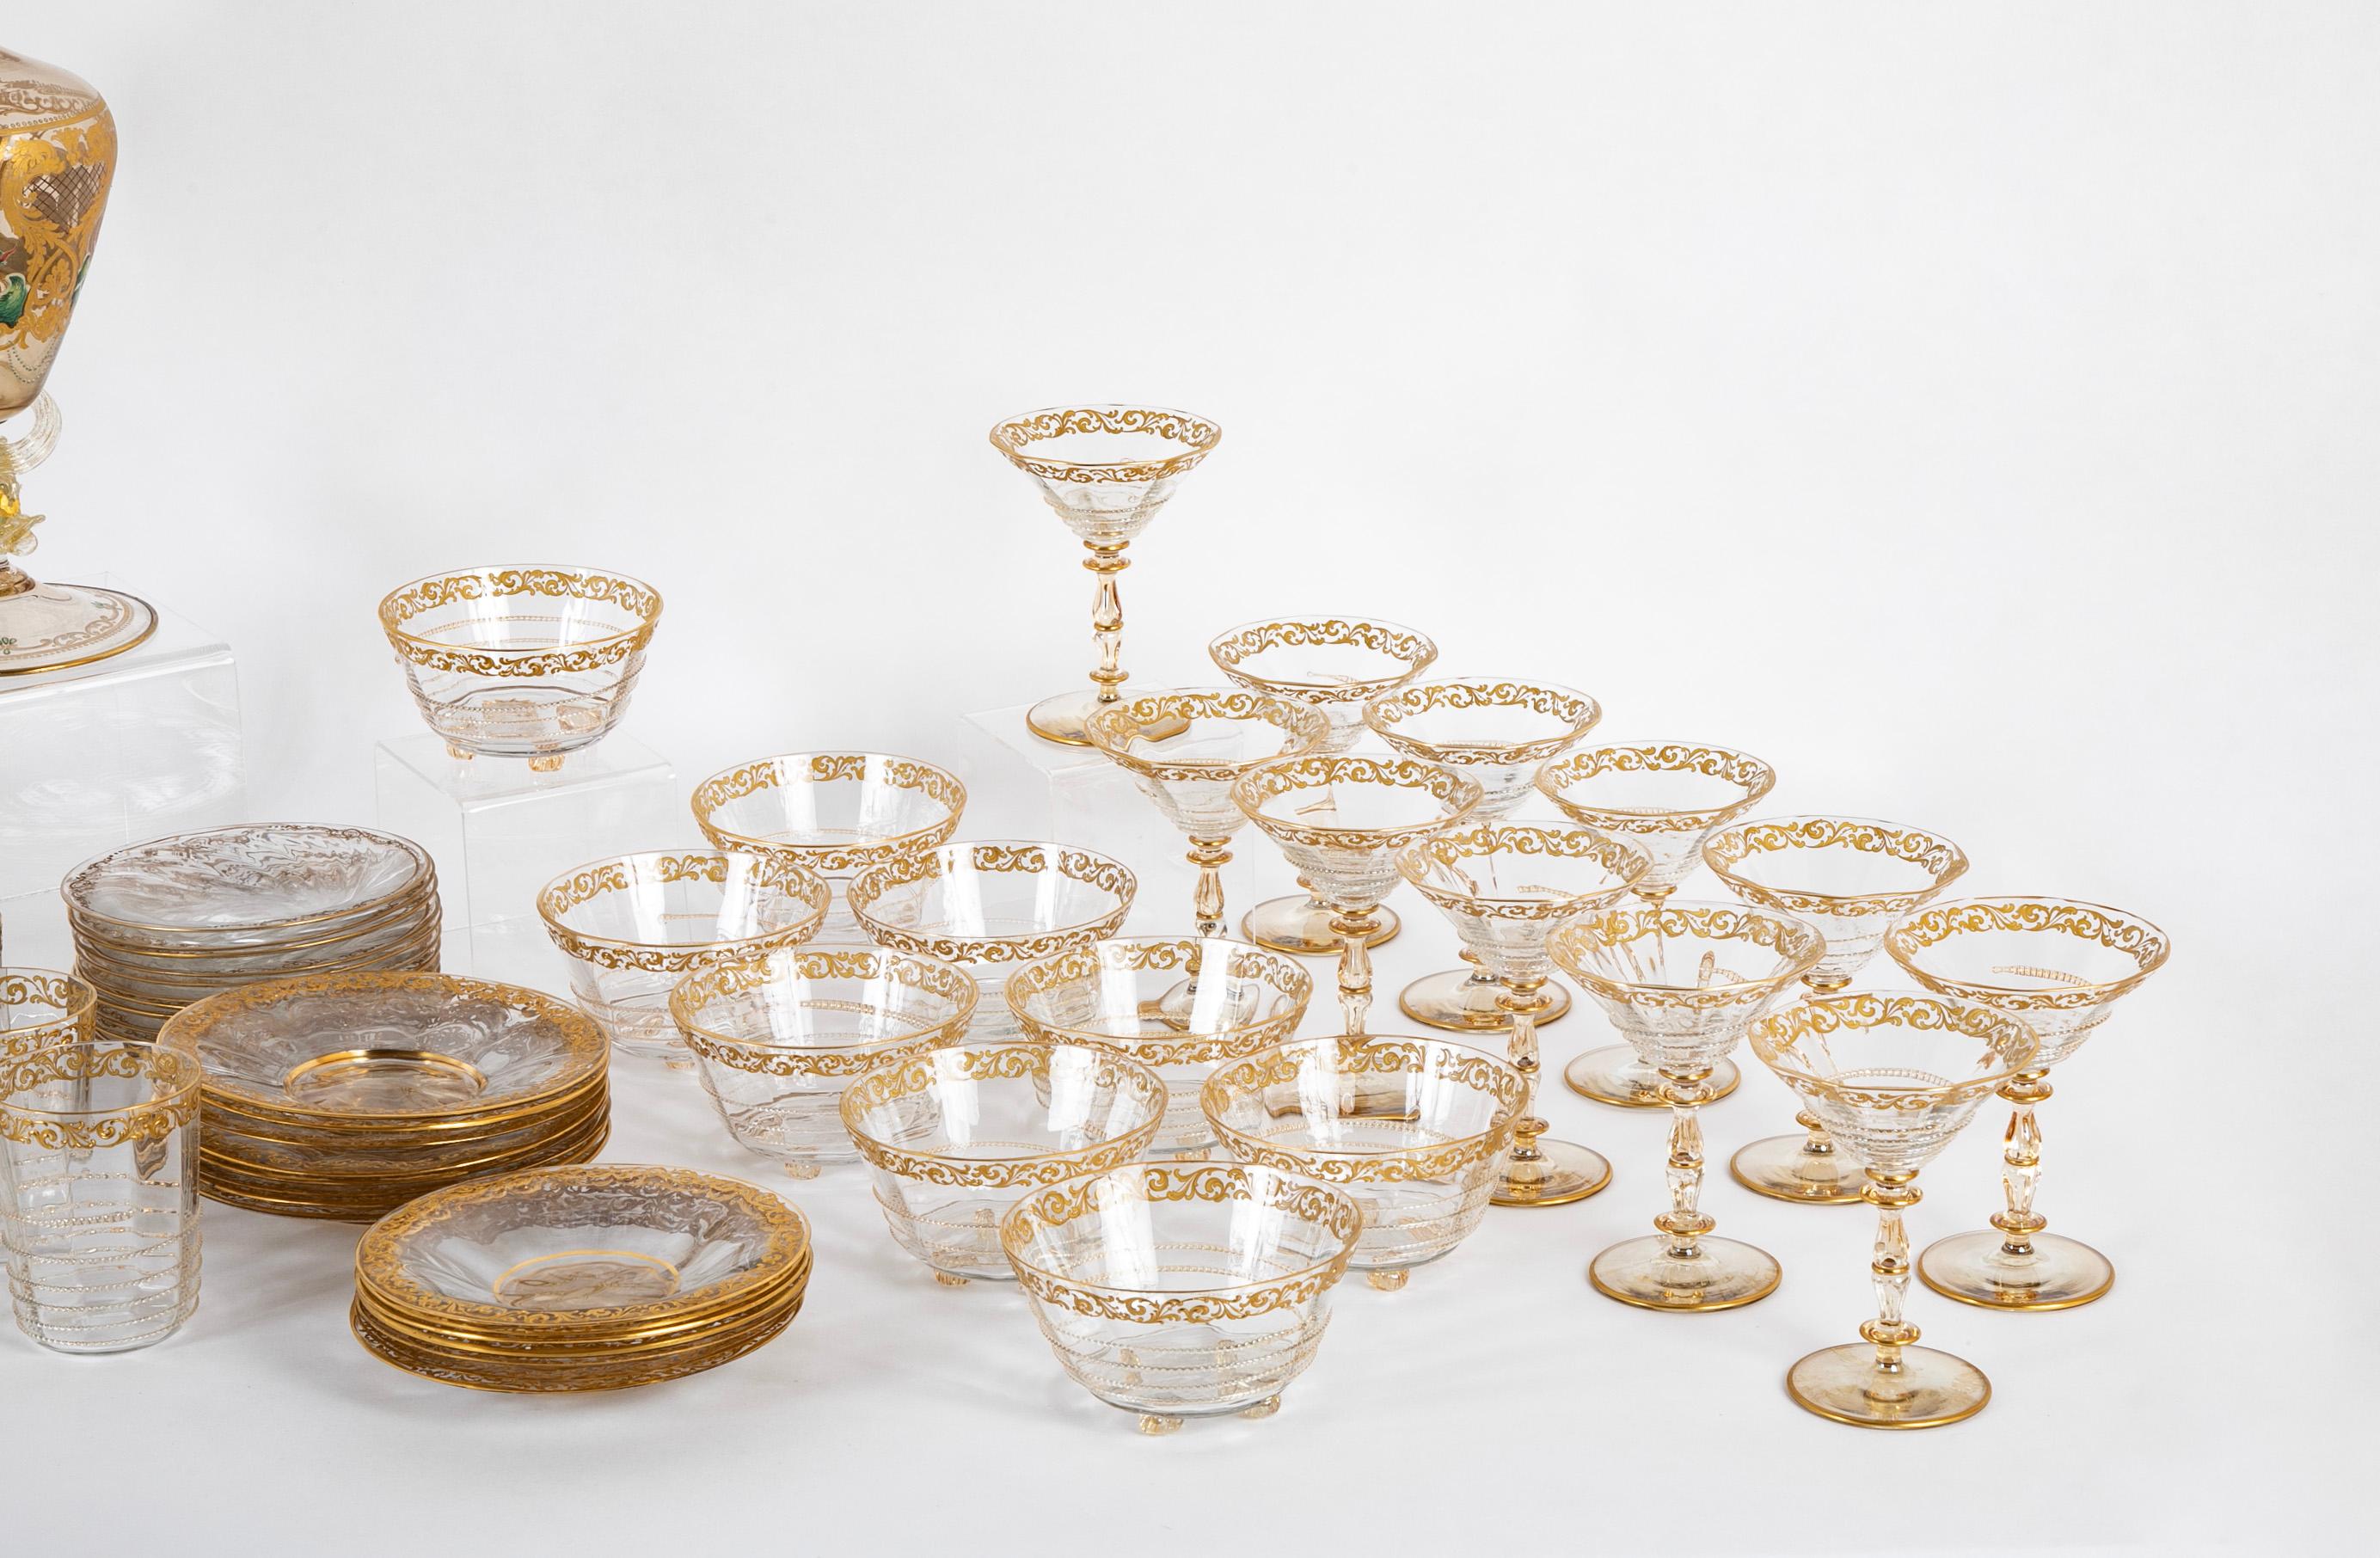 A magnificent collection of late 19th/early 20th century Venetian glassware.  

Consisting of :  12 Tumblers : 4